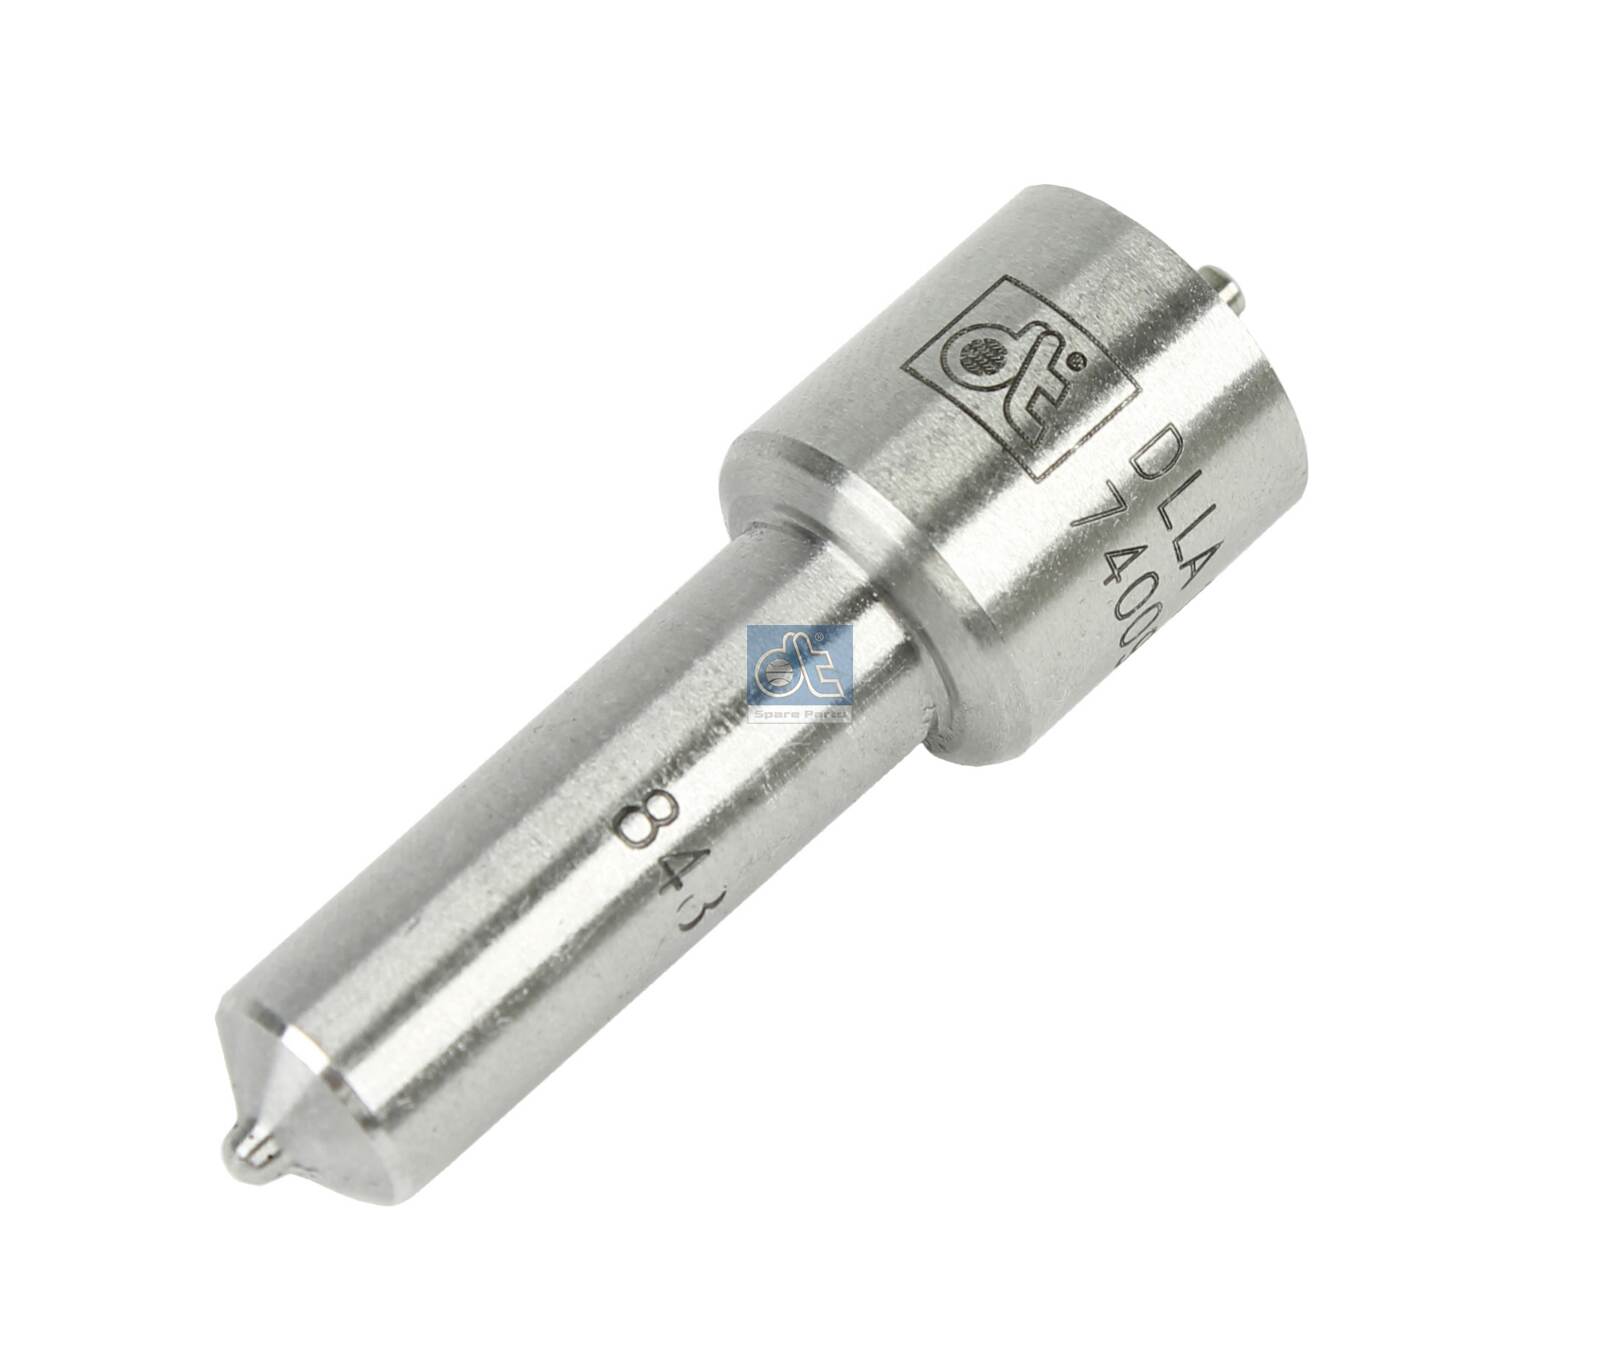 3.20005, Injector Nozzle, DT Spare Parts, 51.10102.0252, 026.164, 0433171583, 103130